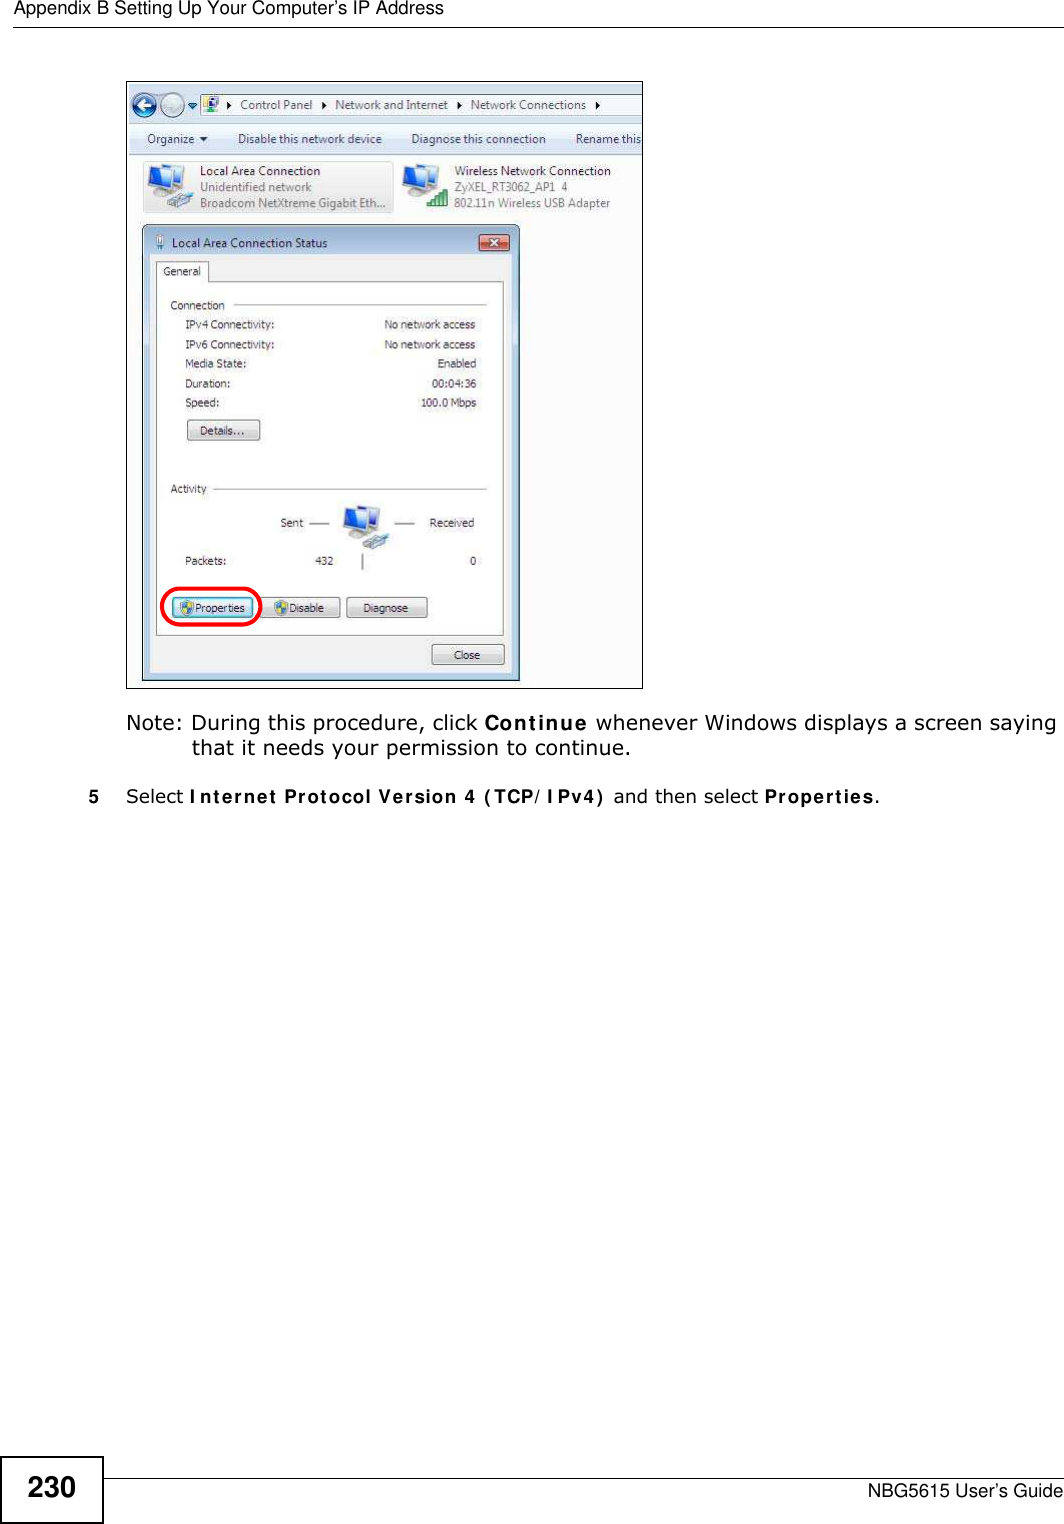 Appendix B Setting Up Your Computer’s IP AddressNBG5615 User’s Guide230Note: During this procedure, click Continue whenever Windows displays a screen saying that it needs your permission to continue.5Select I nternet Protocol Version 4 ( TCP/ I Pv4)  and then select Properties.